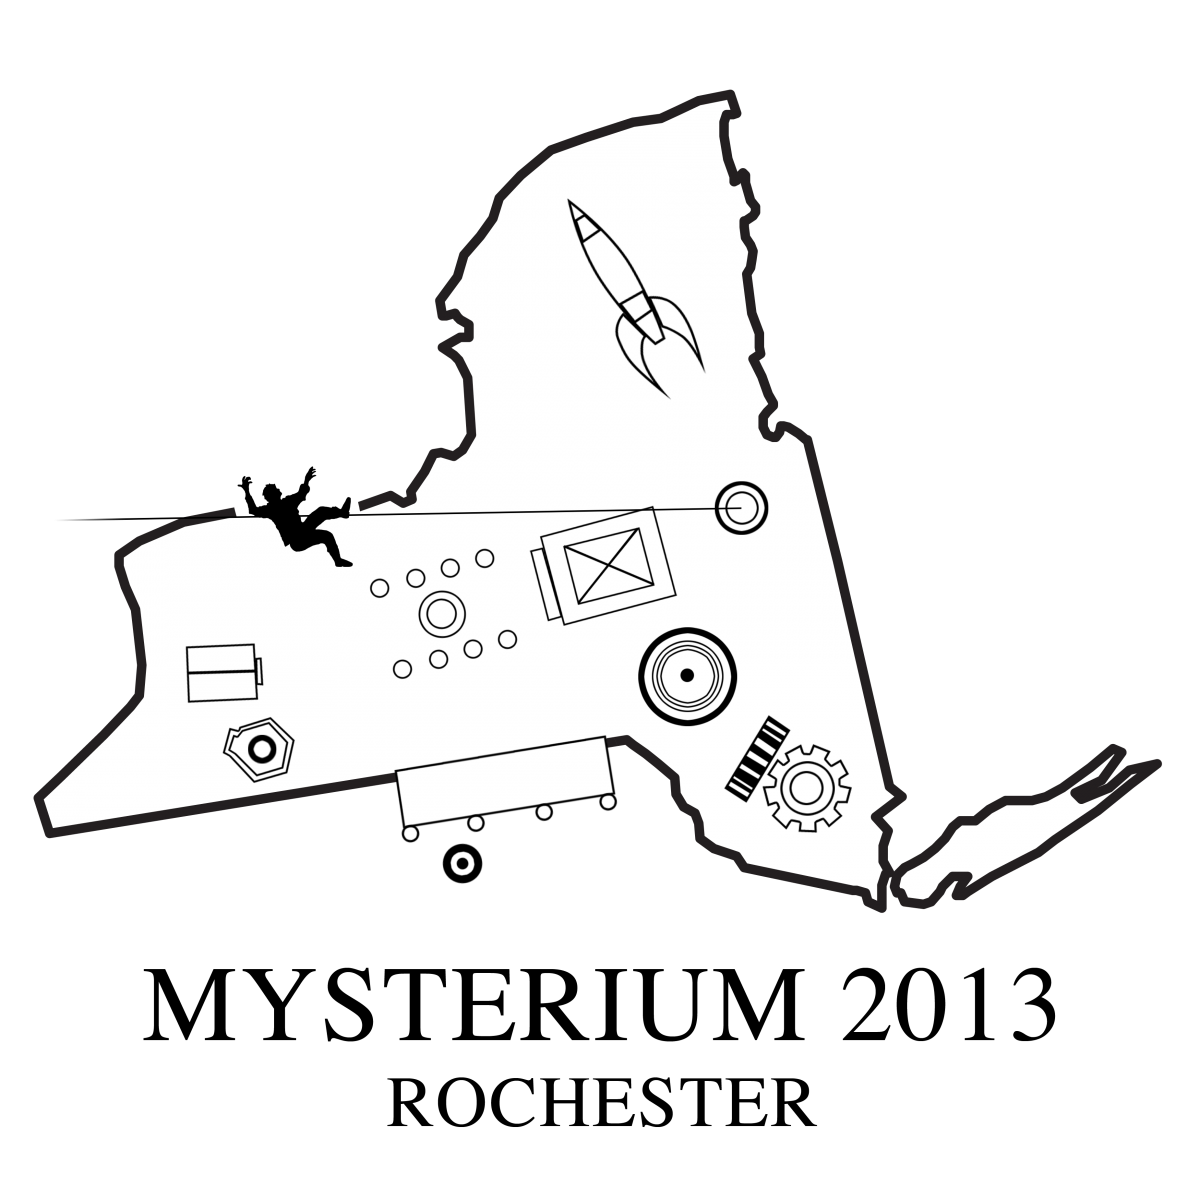 outline of New York state with Mysterium 2013 Rochester in text and icons of the places of power